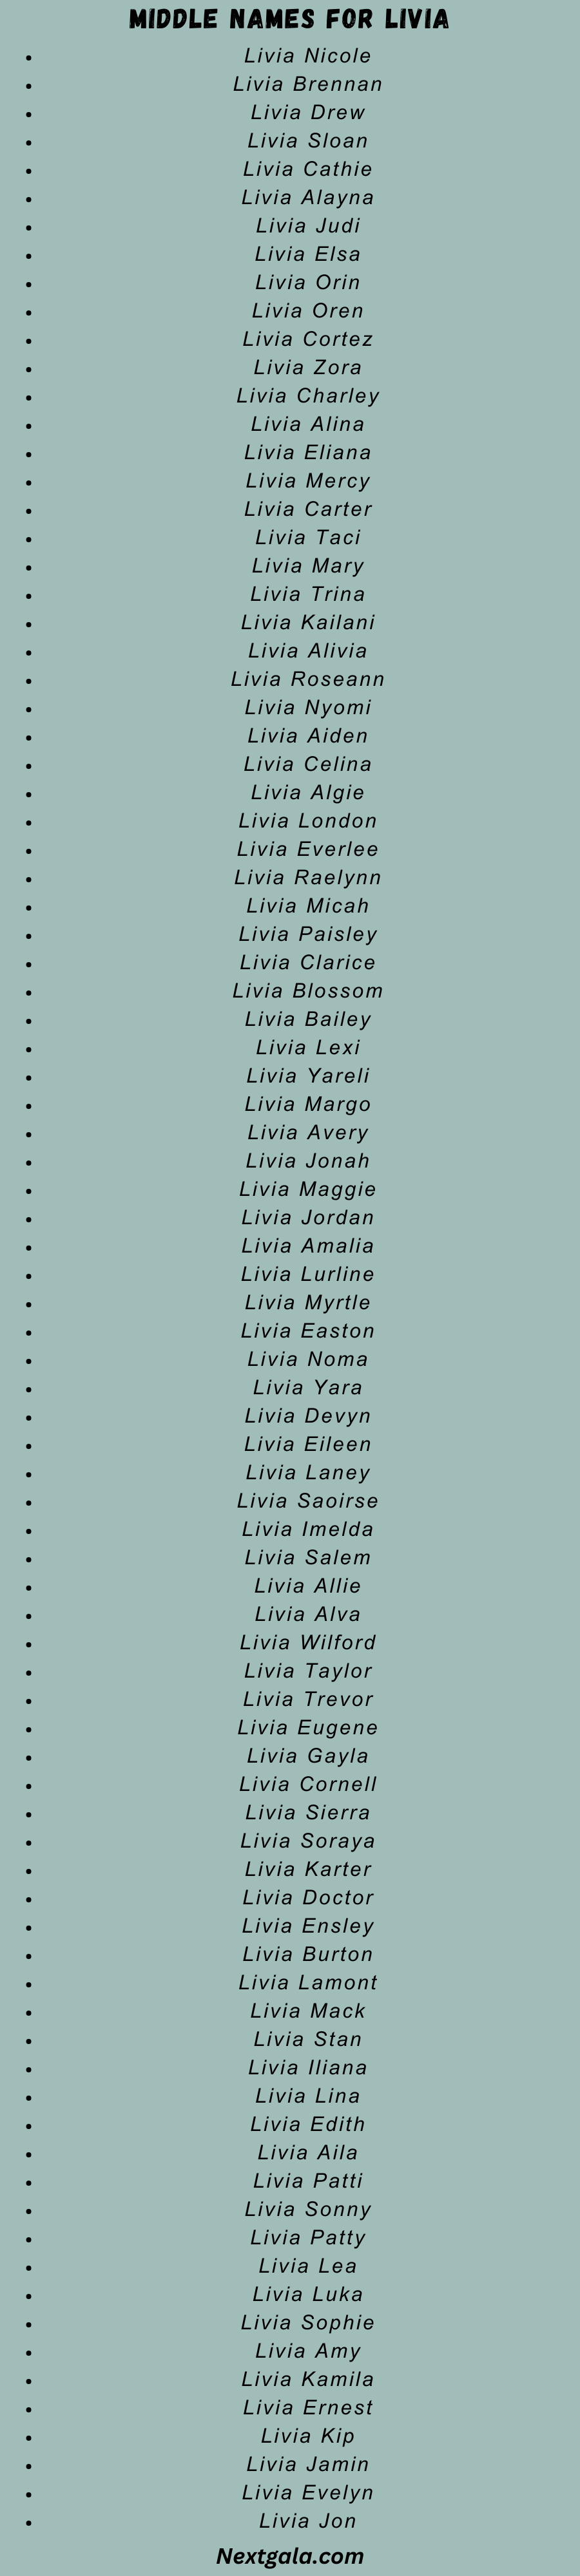 Middle Names for Livia